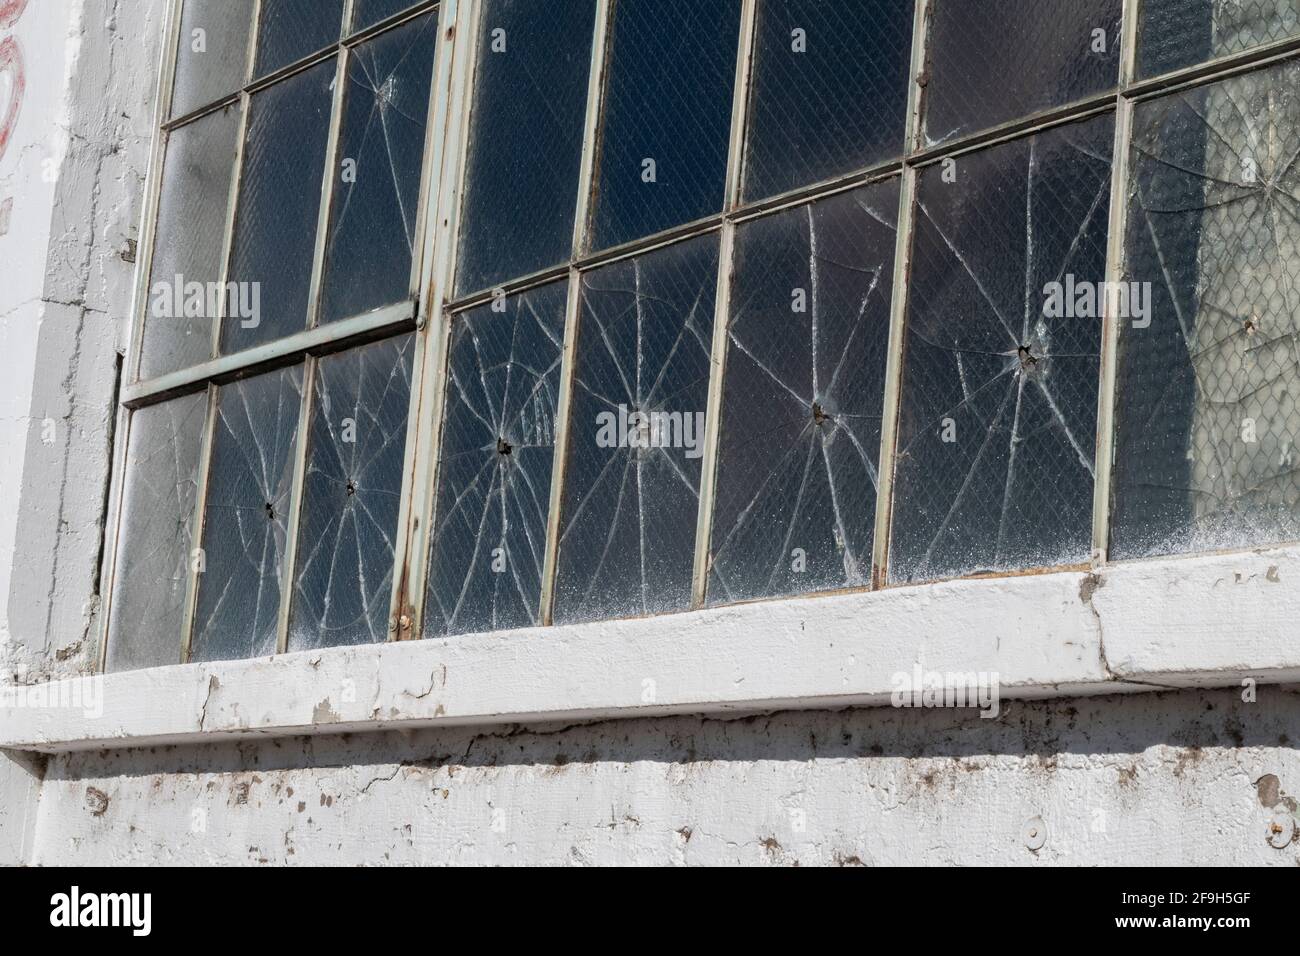 A row of windows in an abandoned building appears to have been shot with a pellet or bb gun. Stock Photo